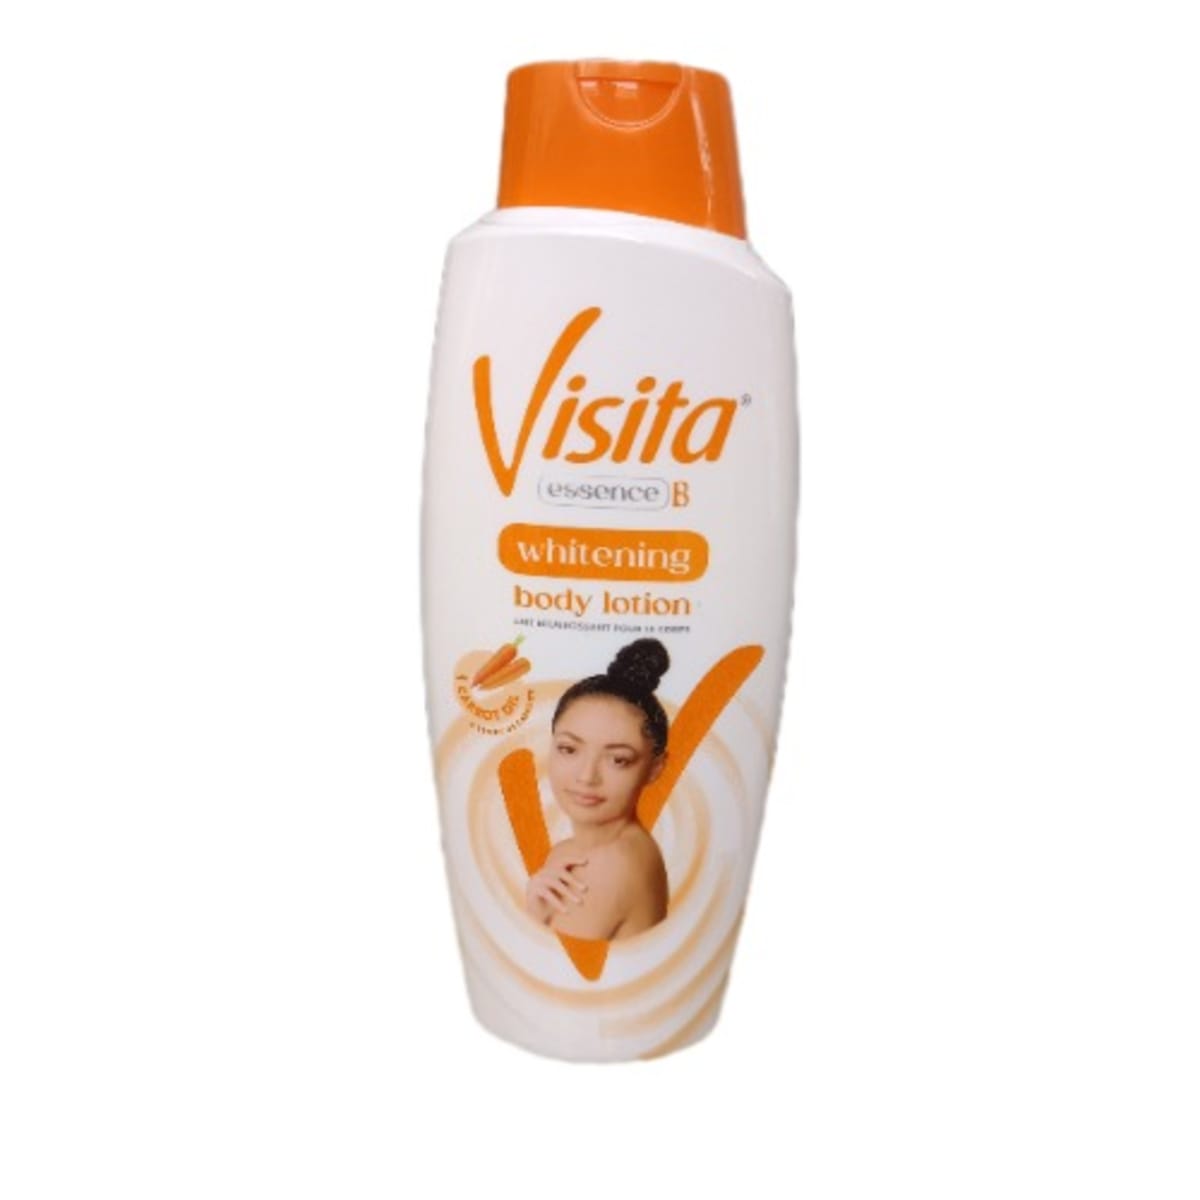 Visita Essence B - Skin Whitening Lotion 500ml And Complexion Soap 150g